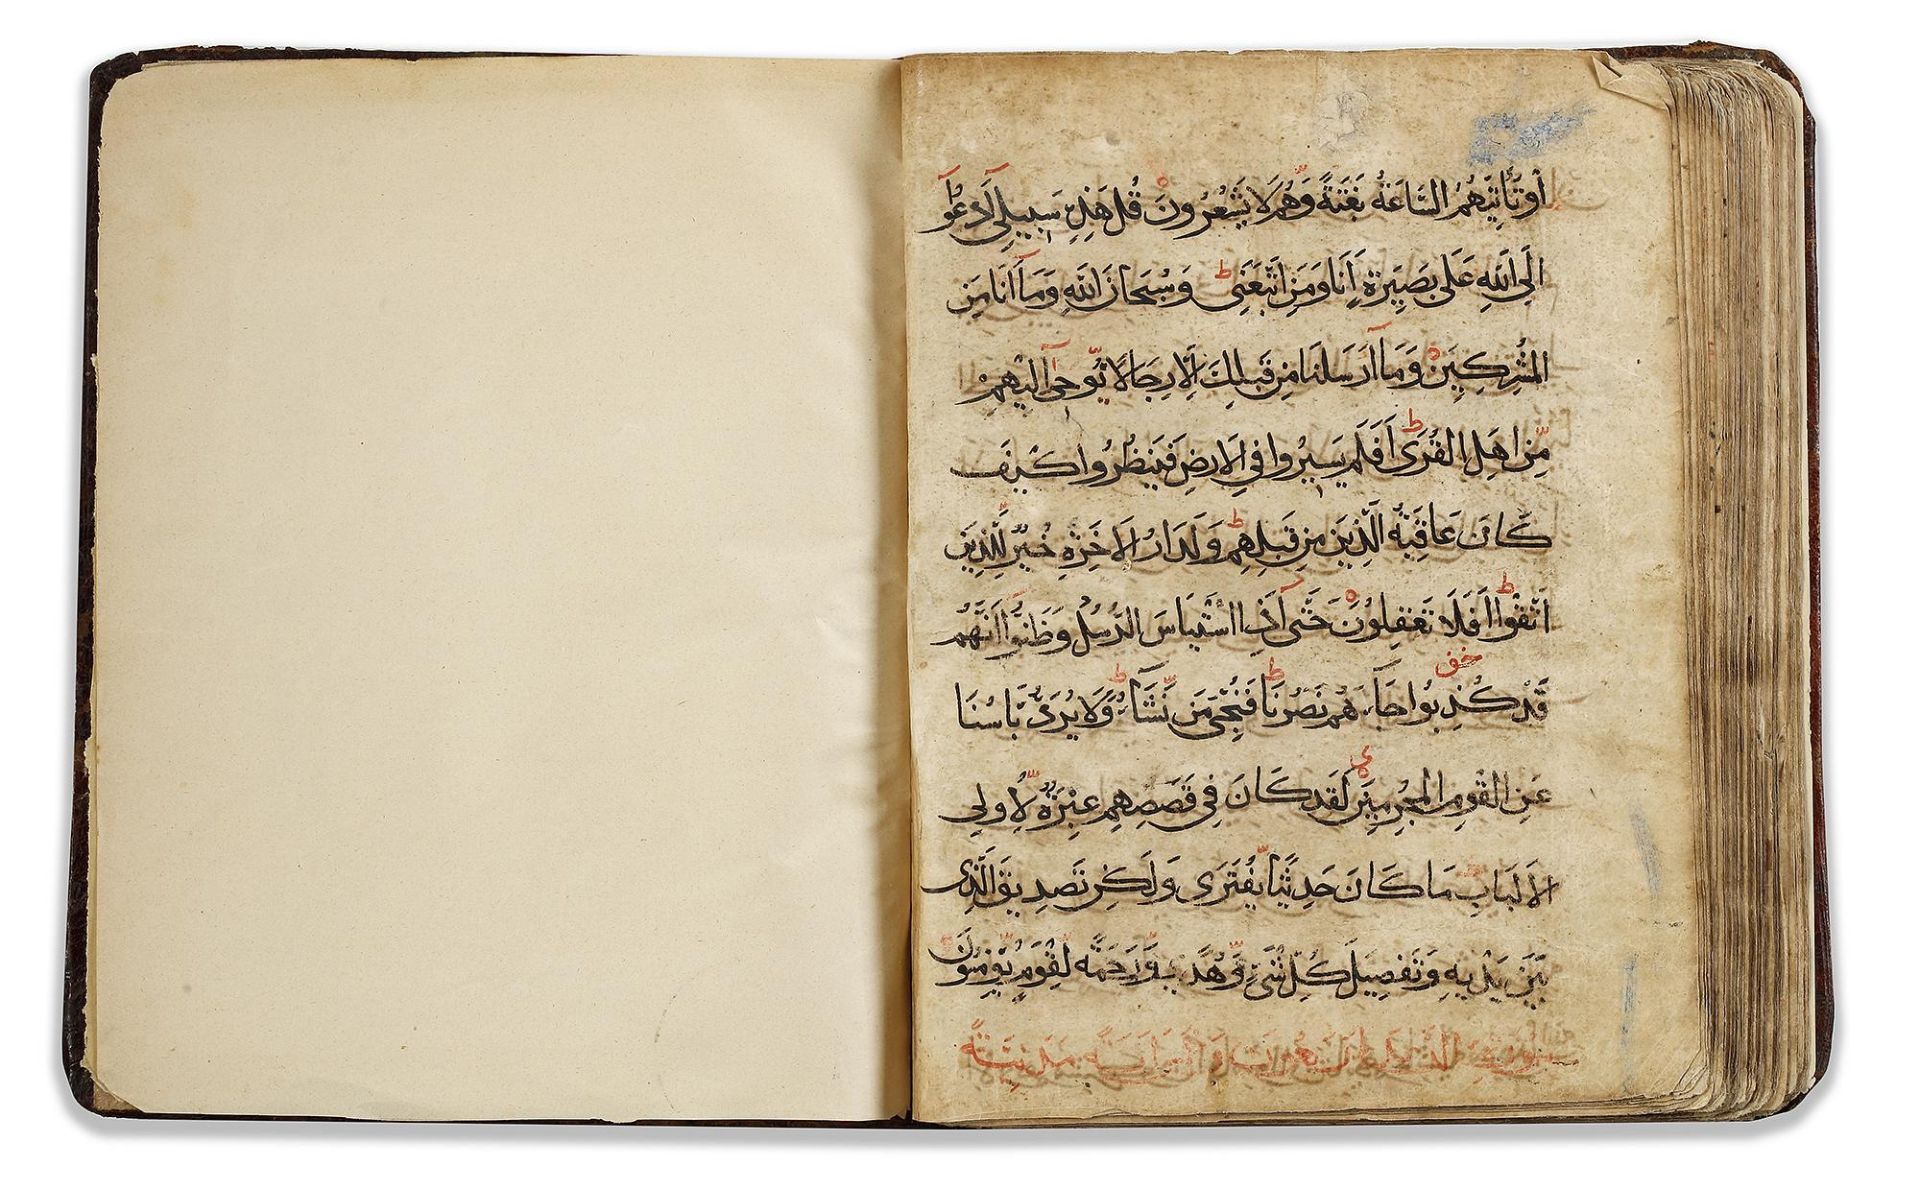 A QURAN JUZ, CENTRAL ASIA, 16TH-17TH CENTURY - Image 4 of 6